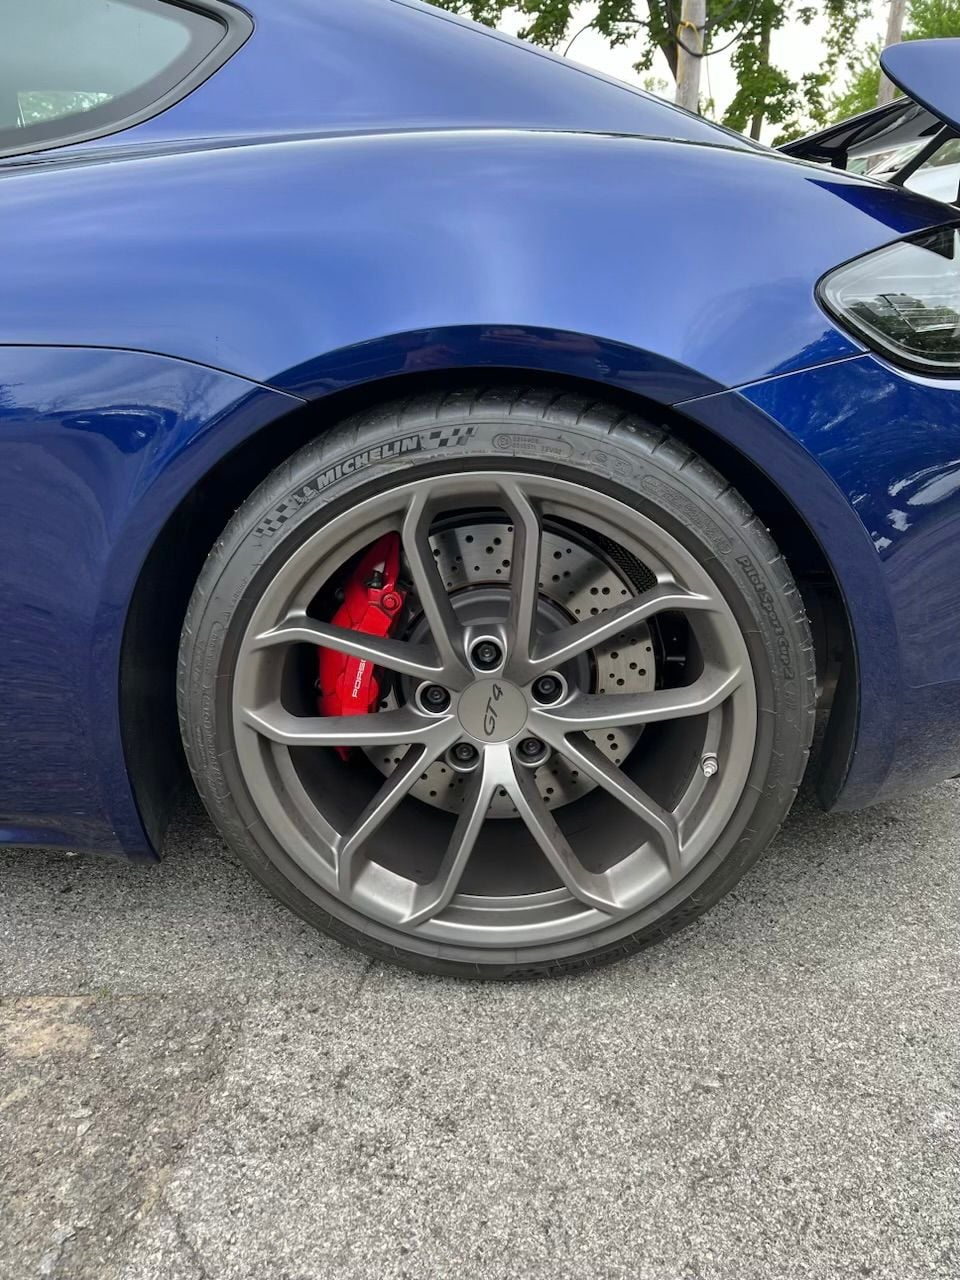 2020 Porsche 718 Cayman - Pristine Very low mileage one owner 2020 GT4 - Used - VIN WP0AC2A87LK289513 - 800 Miles - 6 cyl - 2WD - Manual - Coupe - Blue - Canandaigua, NY 14424, United States